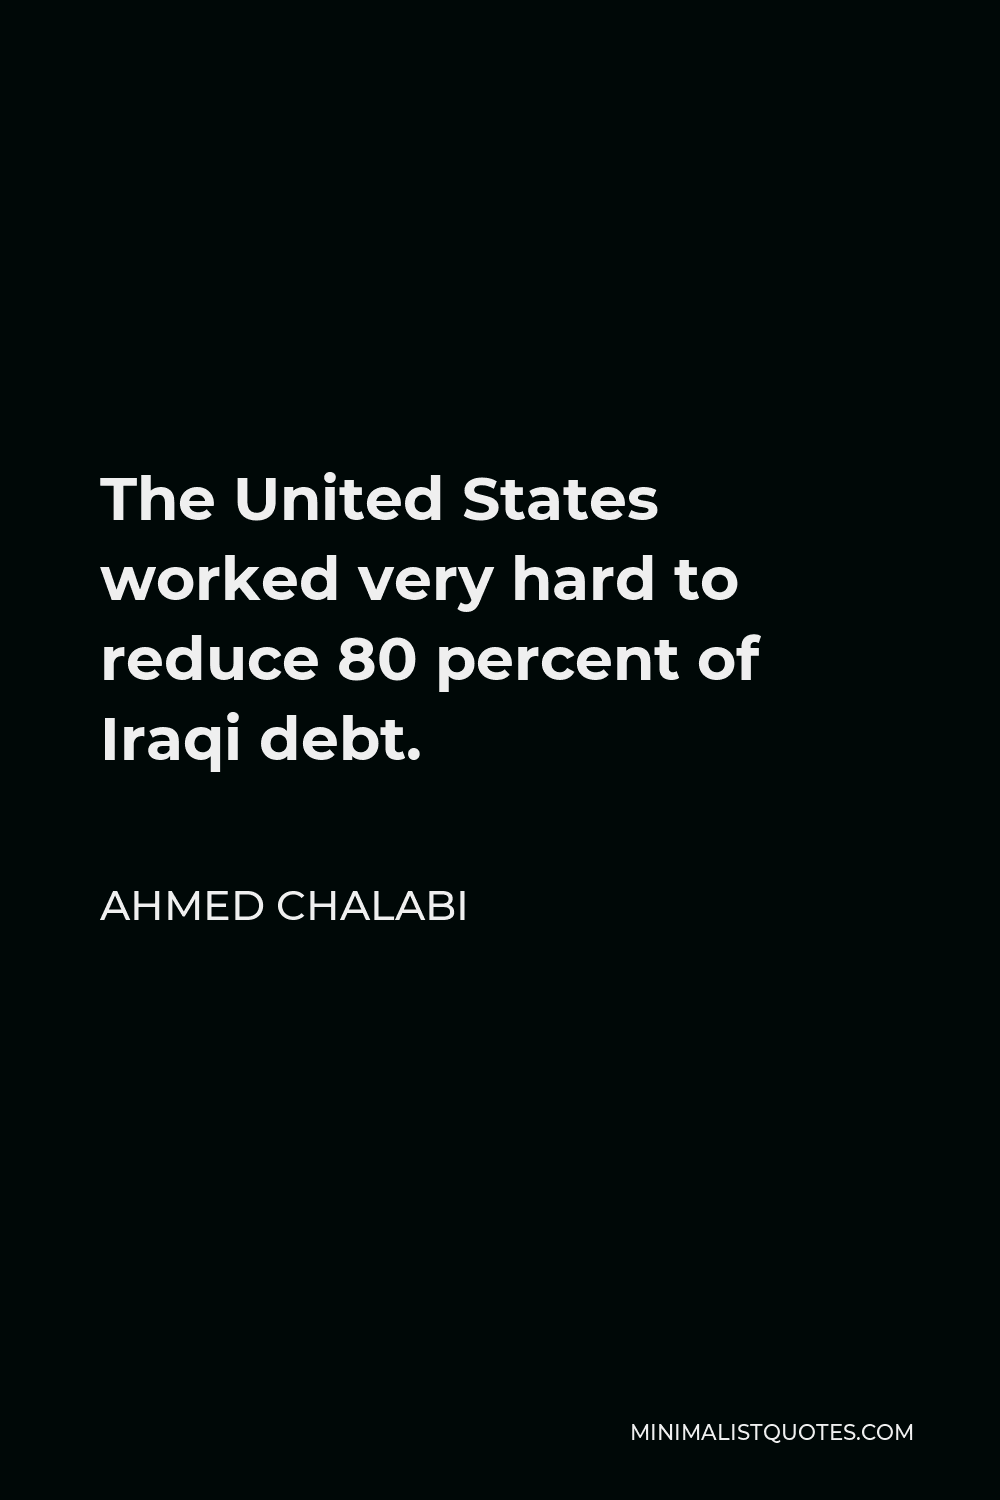 Ahmed Chalabi Quote - The United States worked very hard to reduce 80 percent of Iraqi debt.